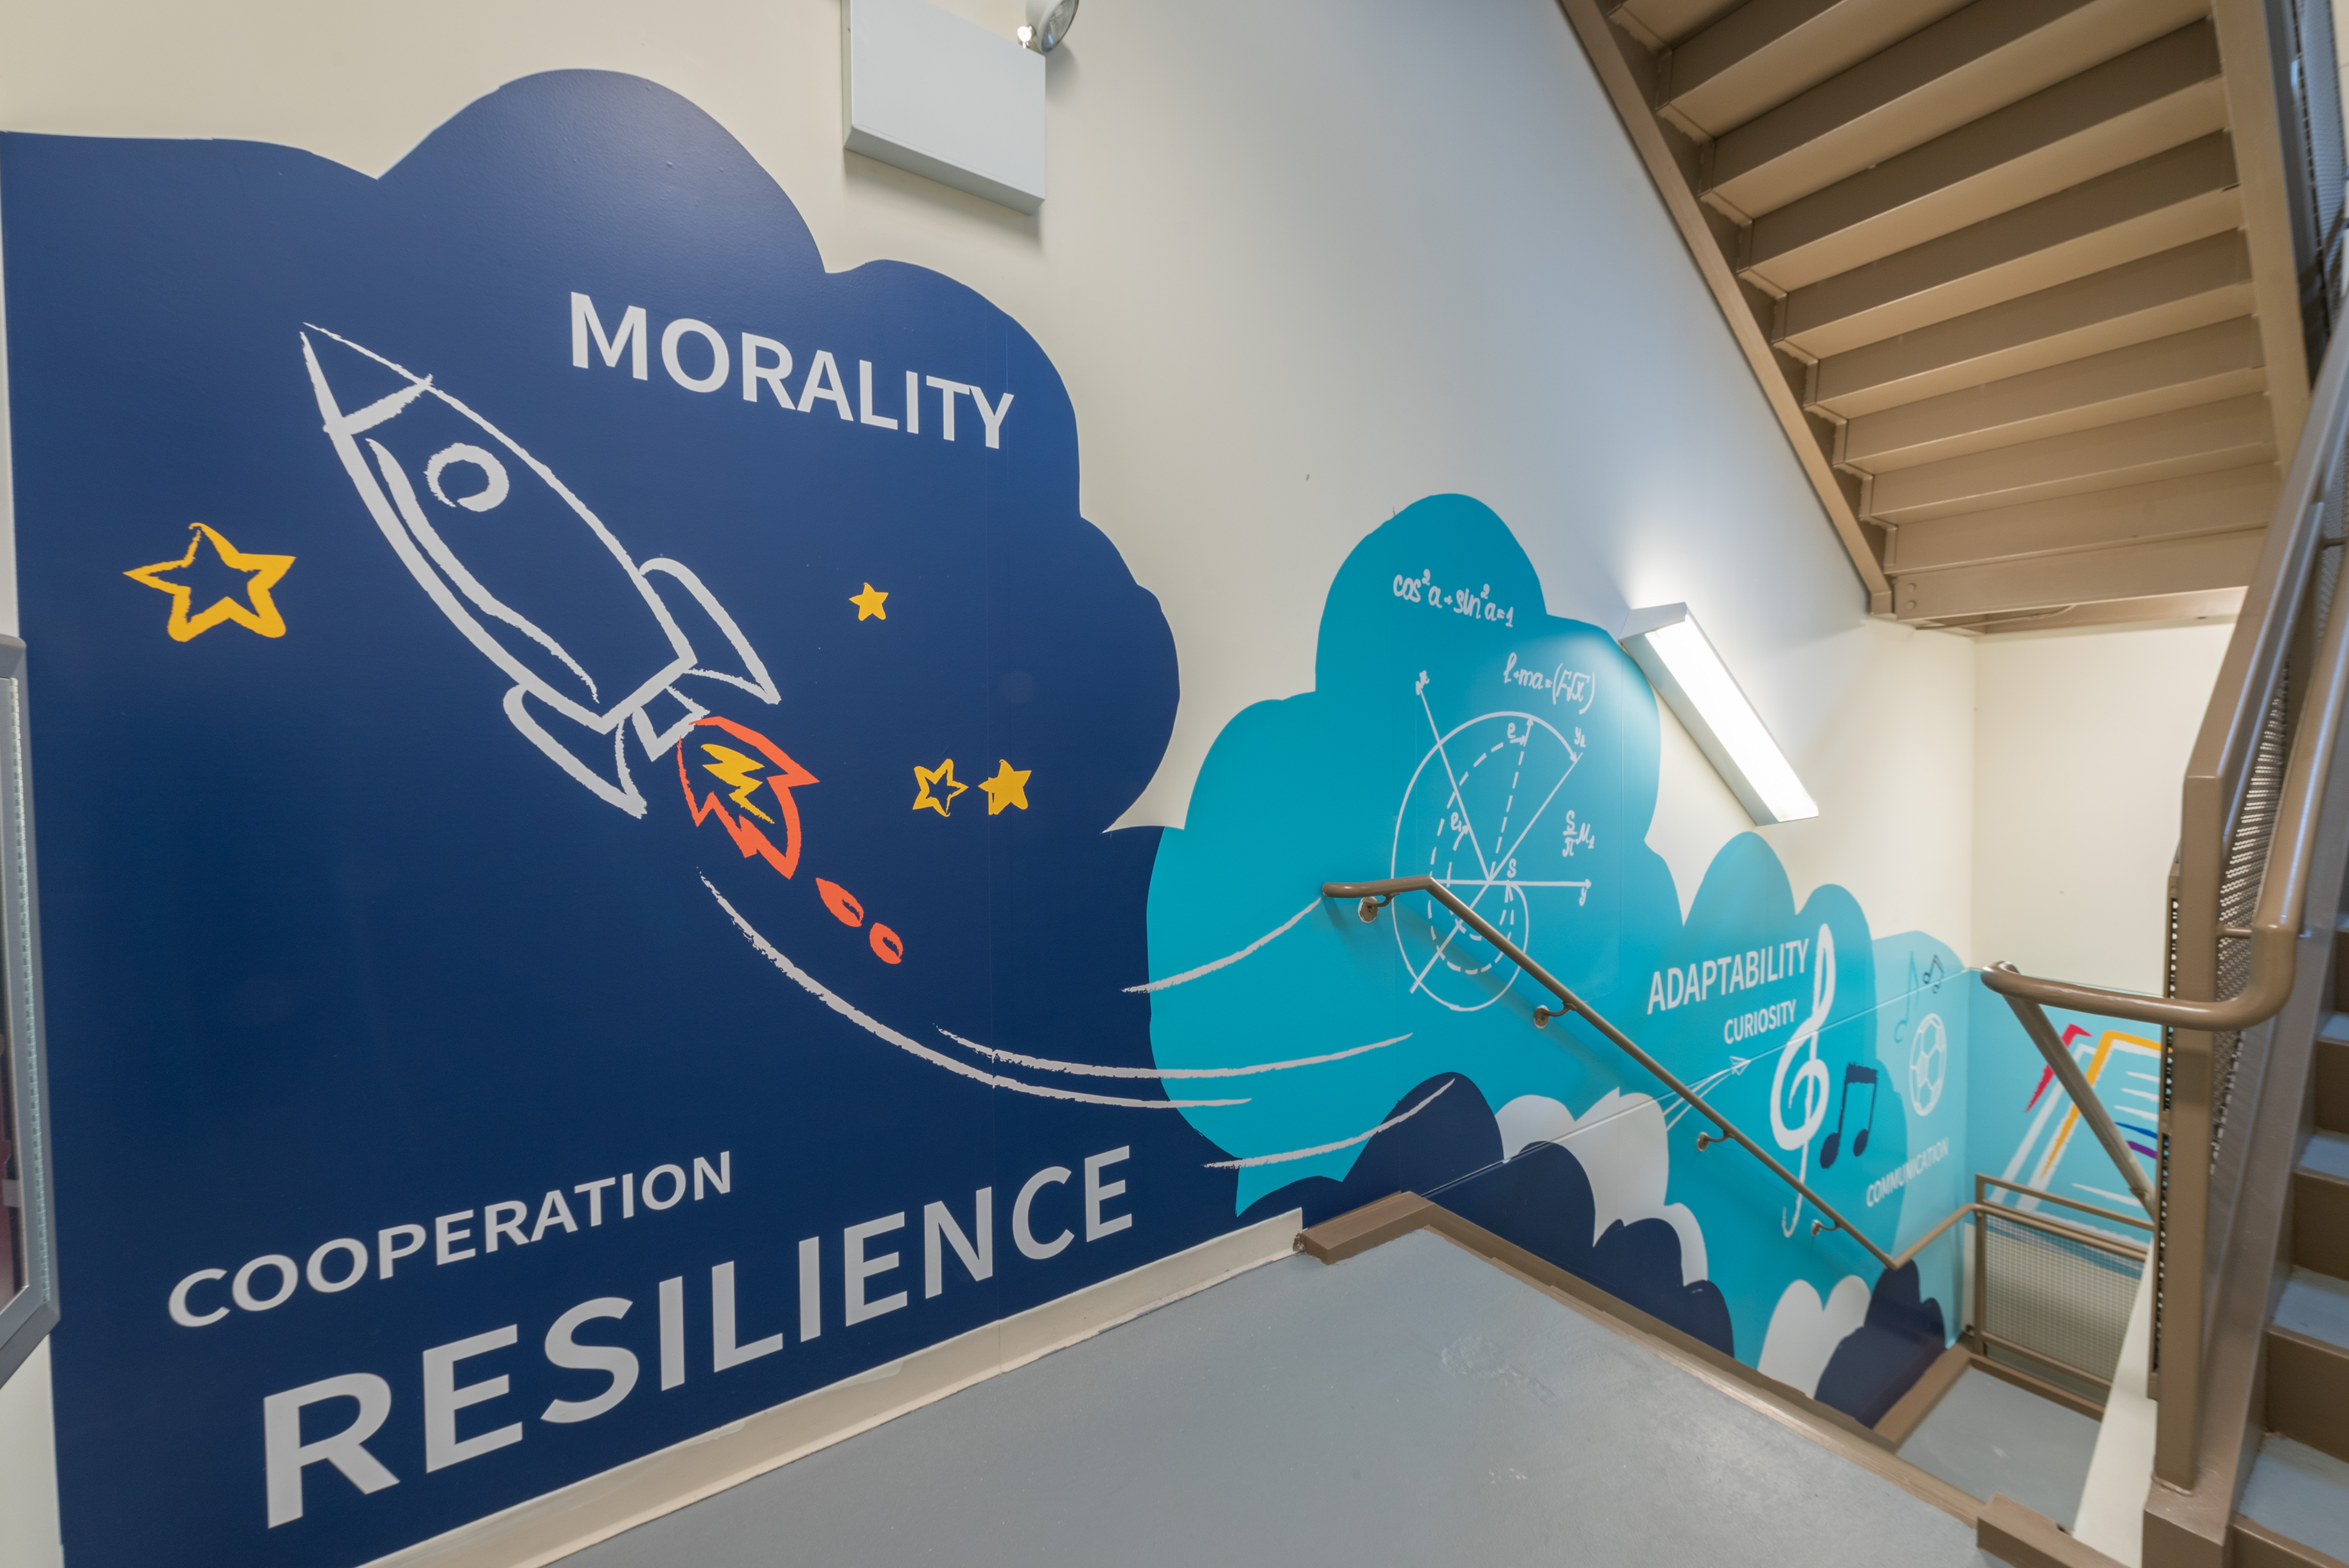 Morality and value school wall mural